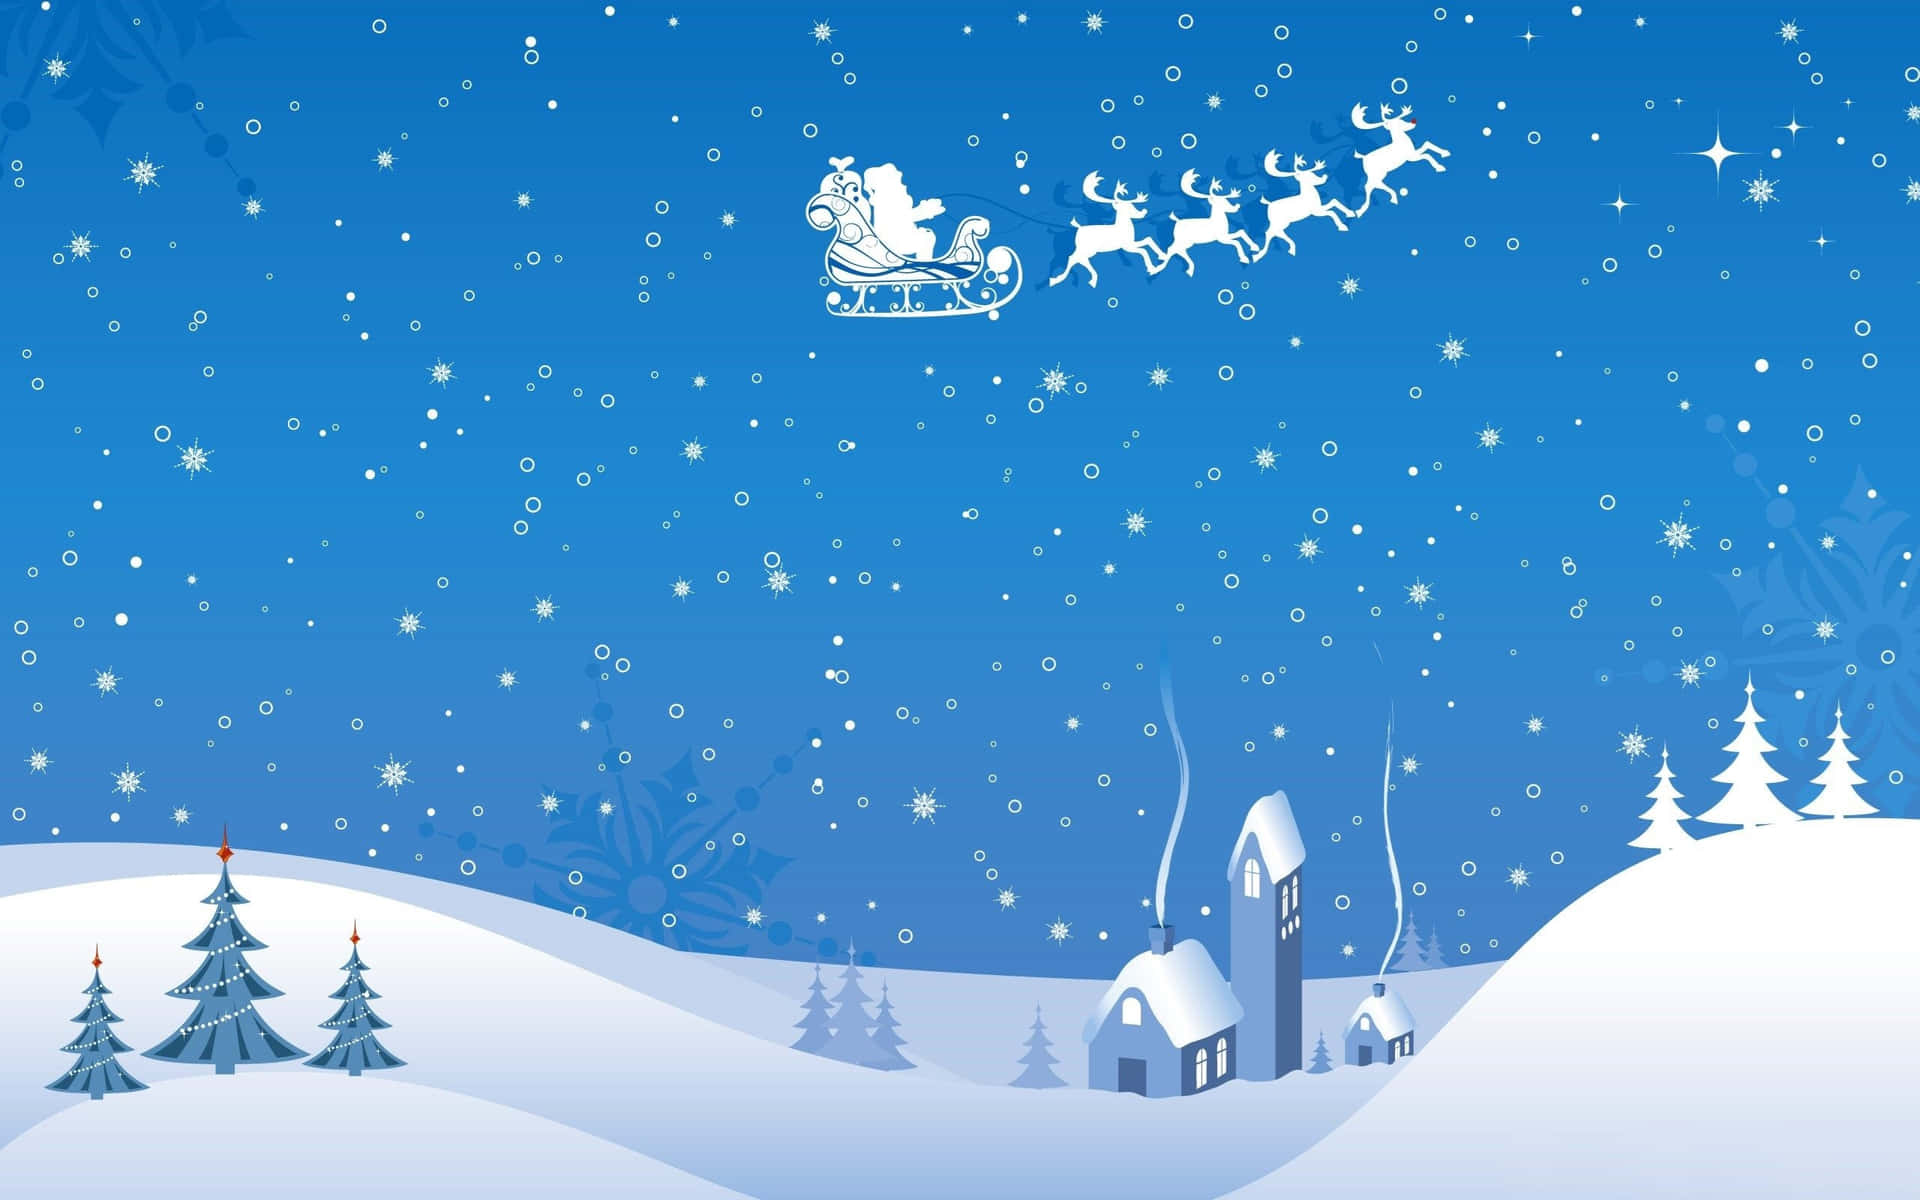 Santa Claus Flying Over A Snowy Landscape Wallpaper